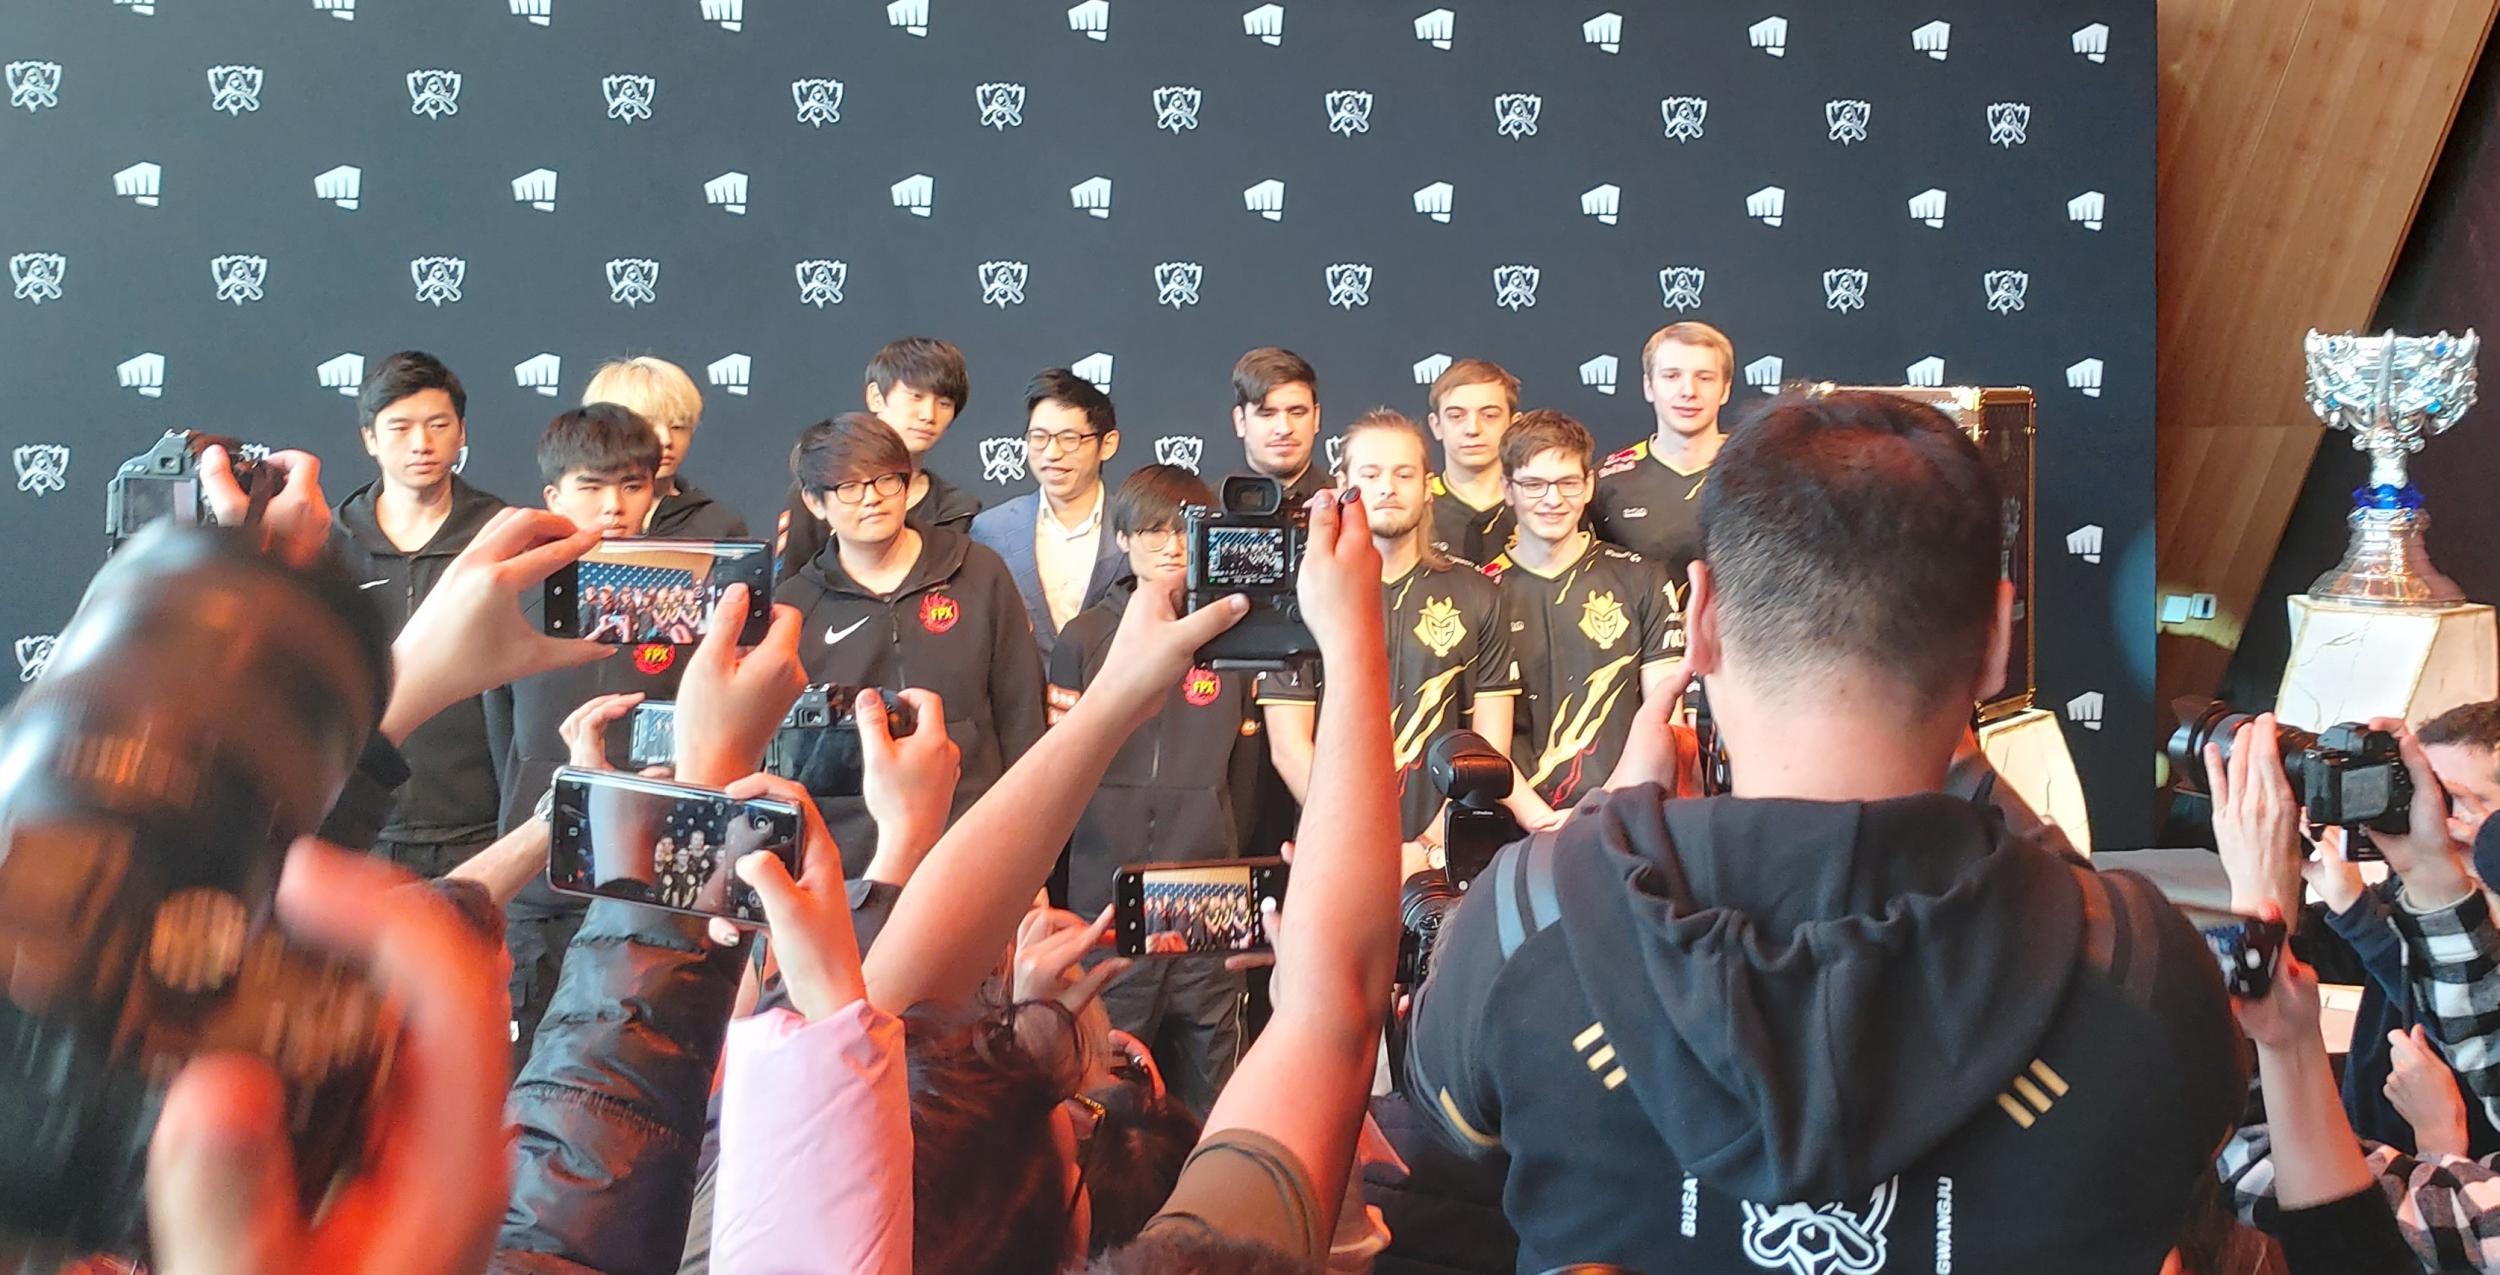 G2 and FPX pose for photos ahead of the 2019 League of Legends World Championship finals in Paris